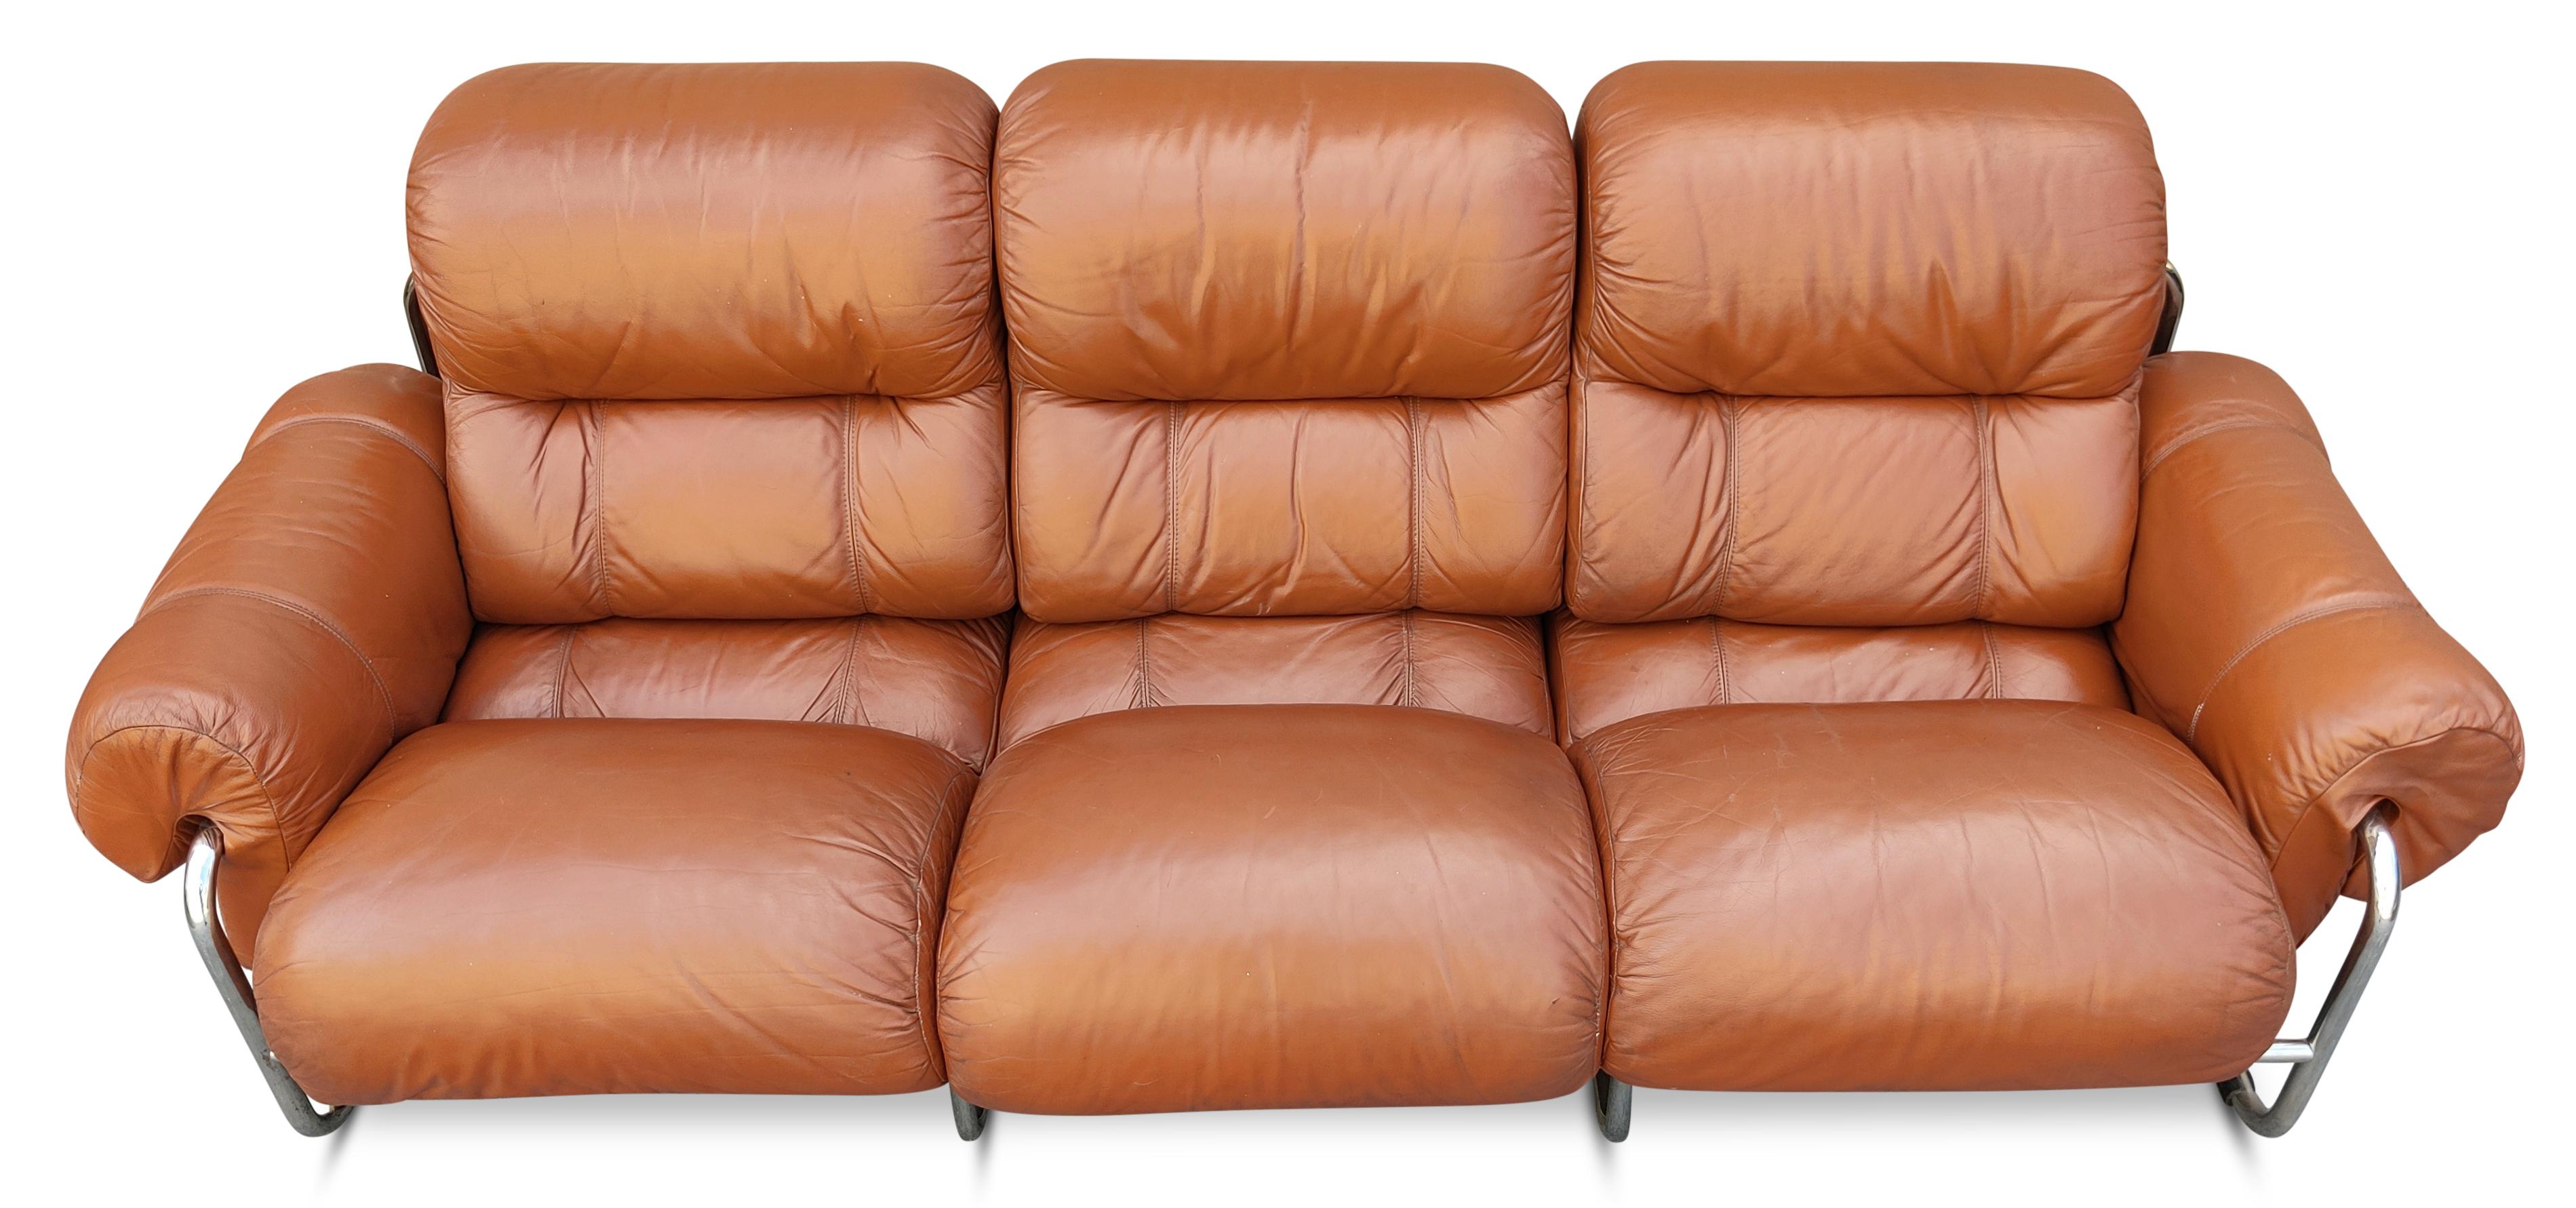 A rare 3-seat sofa with arm with arms was created in the 1970s by Guido Faleschini for i4 Mariani, a subsidiary design firm for the esteemed manufacturer Pace Furniture Company. Our example features its original cognac colored quality leather